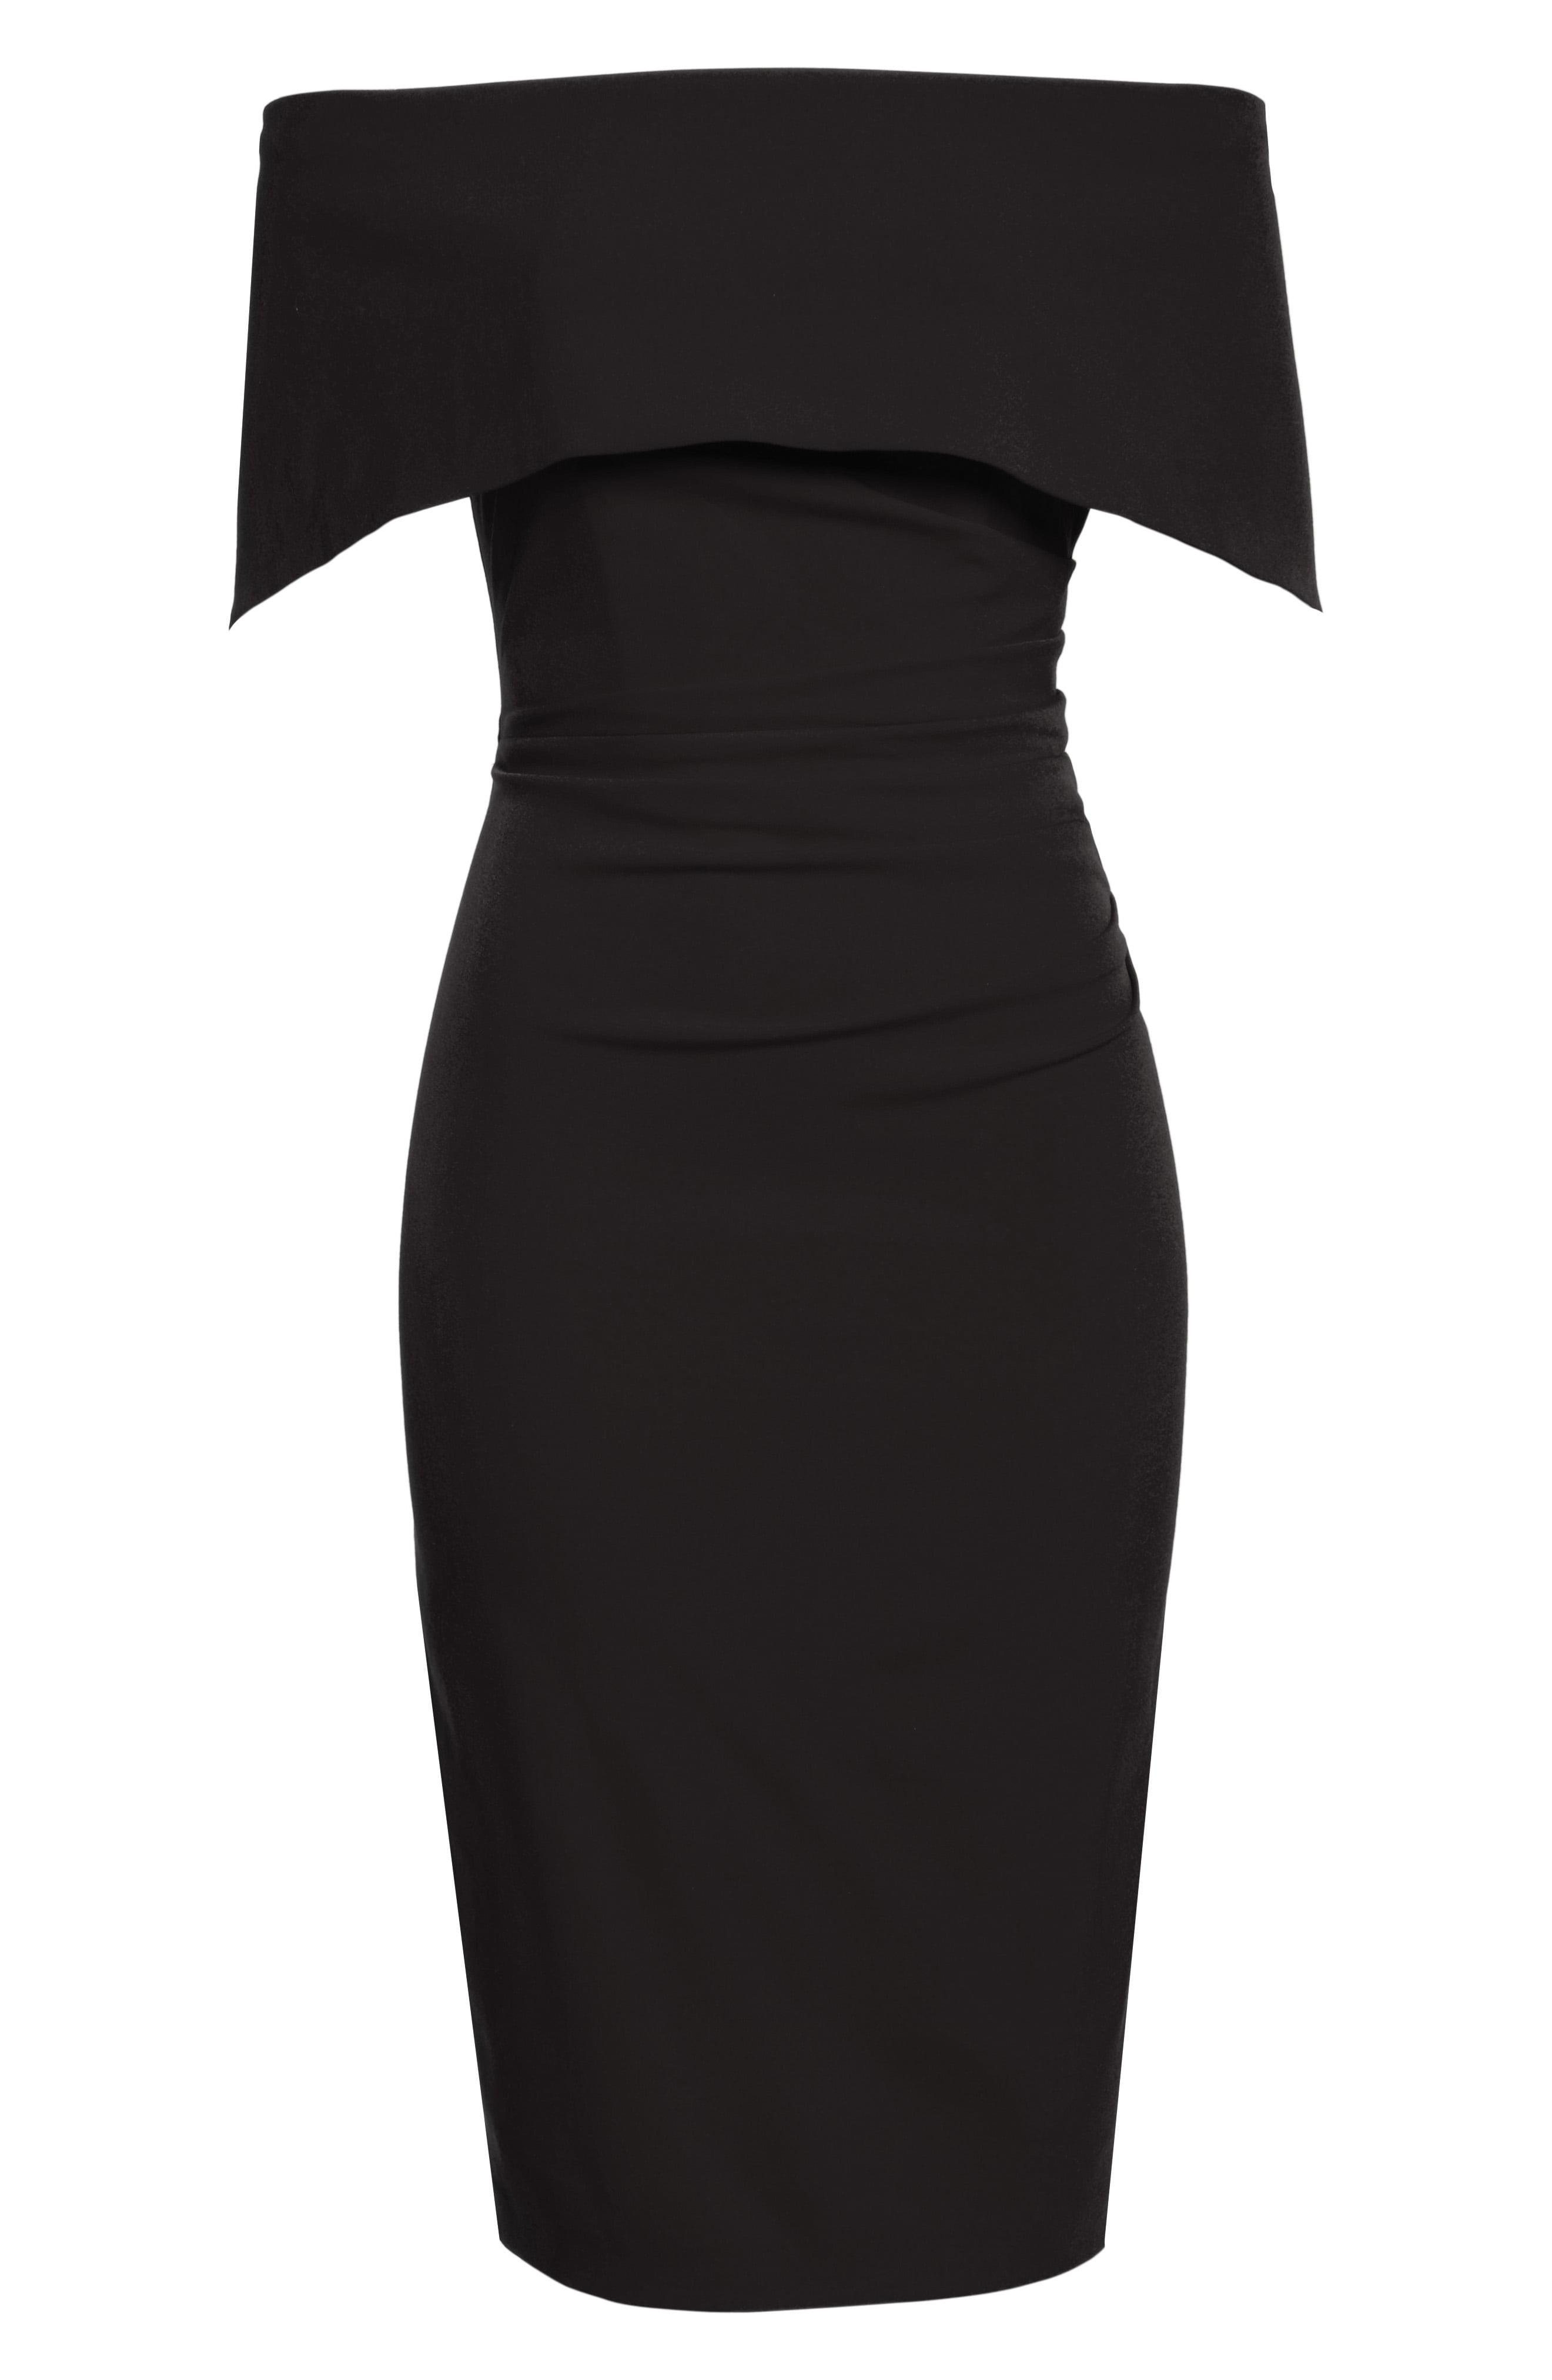 Vince Camuto Popover Dress in Black | Lyst